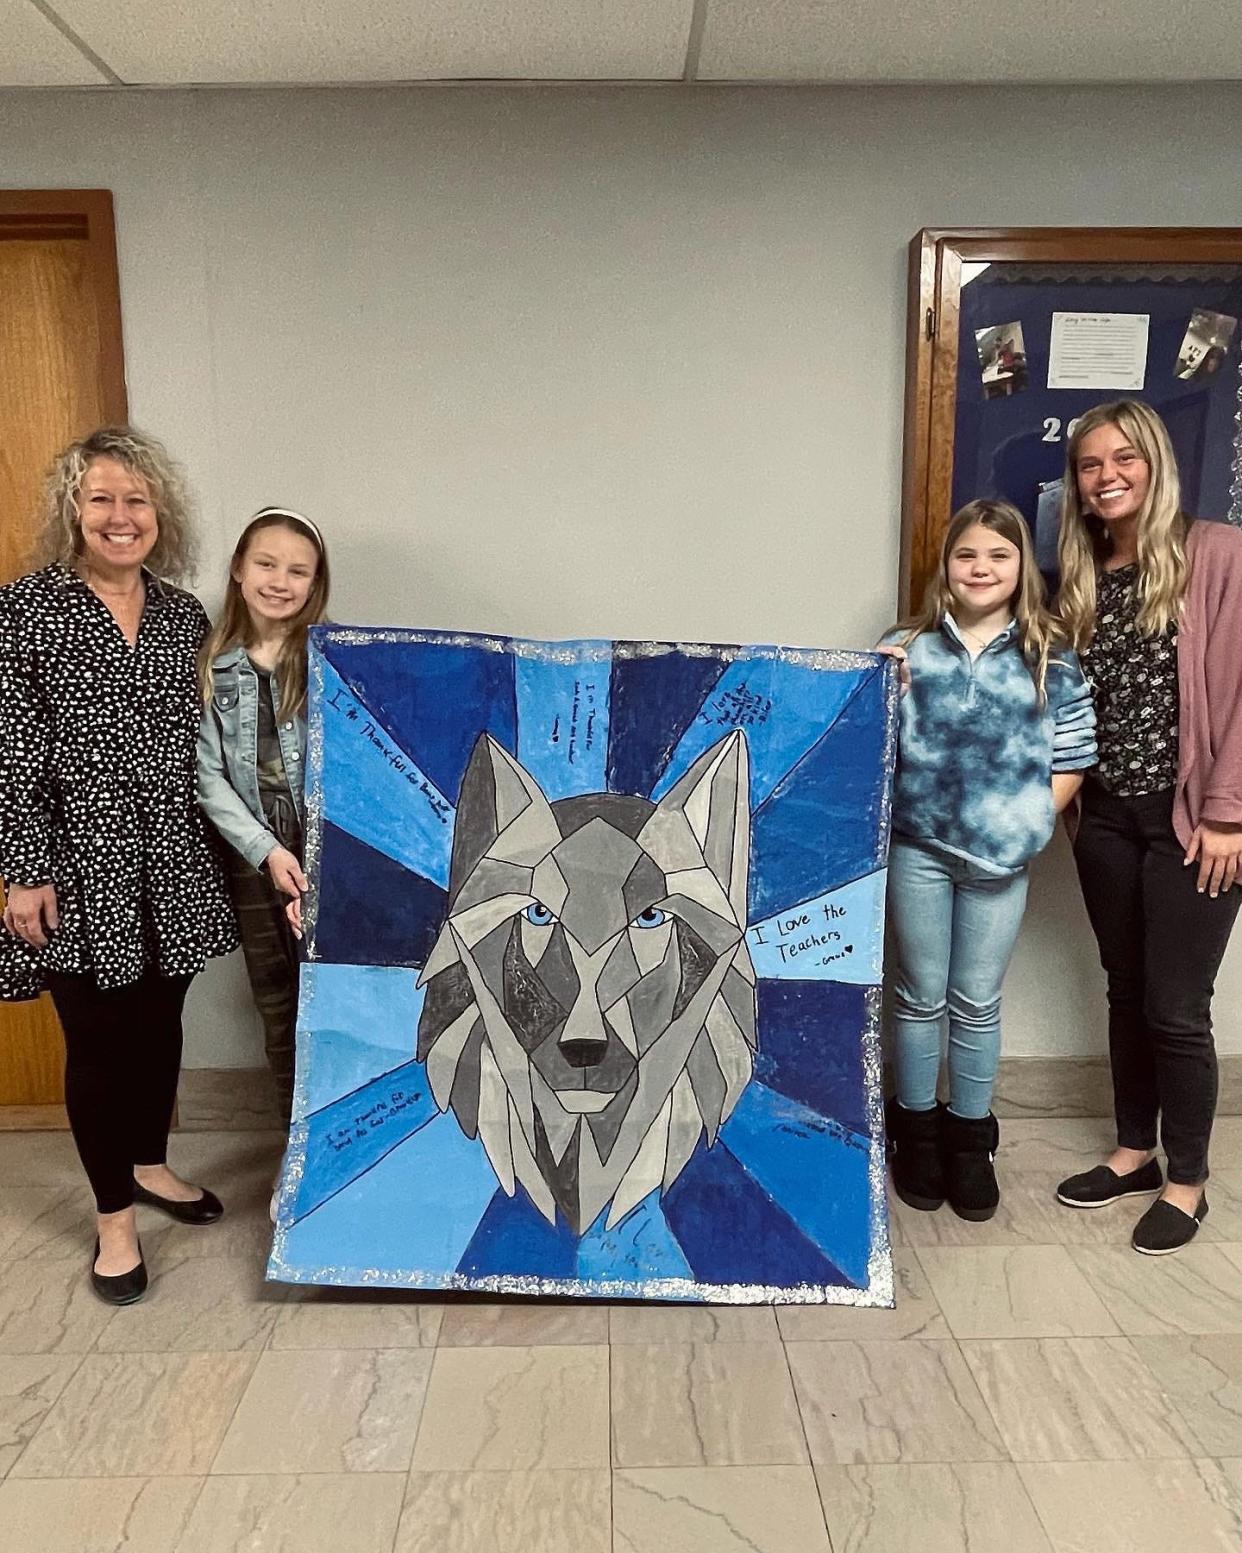 At the School Board Appreciation celebration, students Lainey Wilson and Riley Chamblin presented the fifth grade project to the board members. Pictured from left to right are Principal Jackie Noble, Lainey Wilson, Riley Chamblin, and art teacher Sidney Smith.